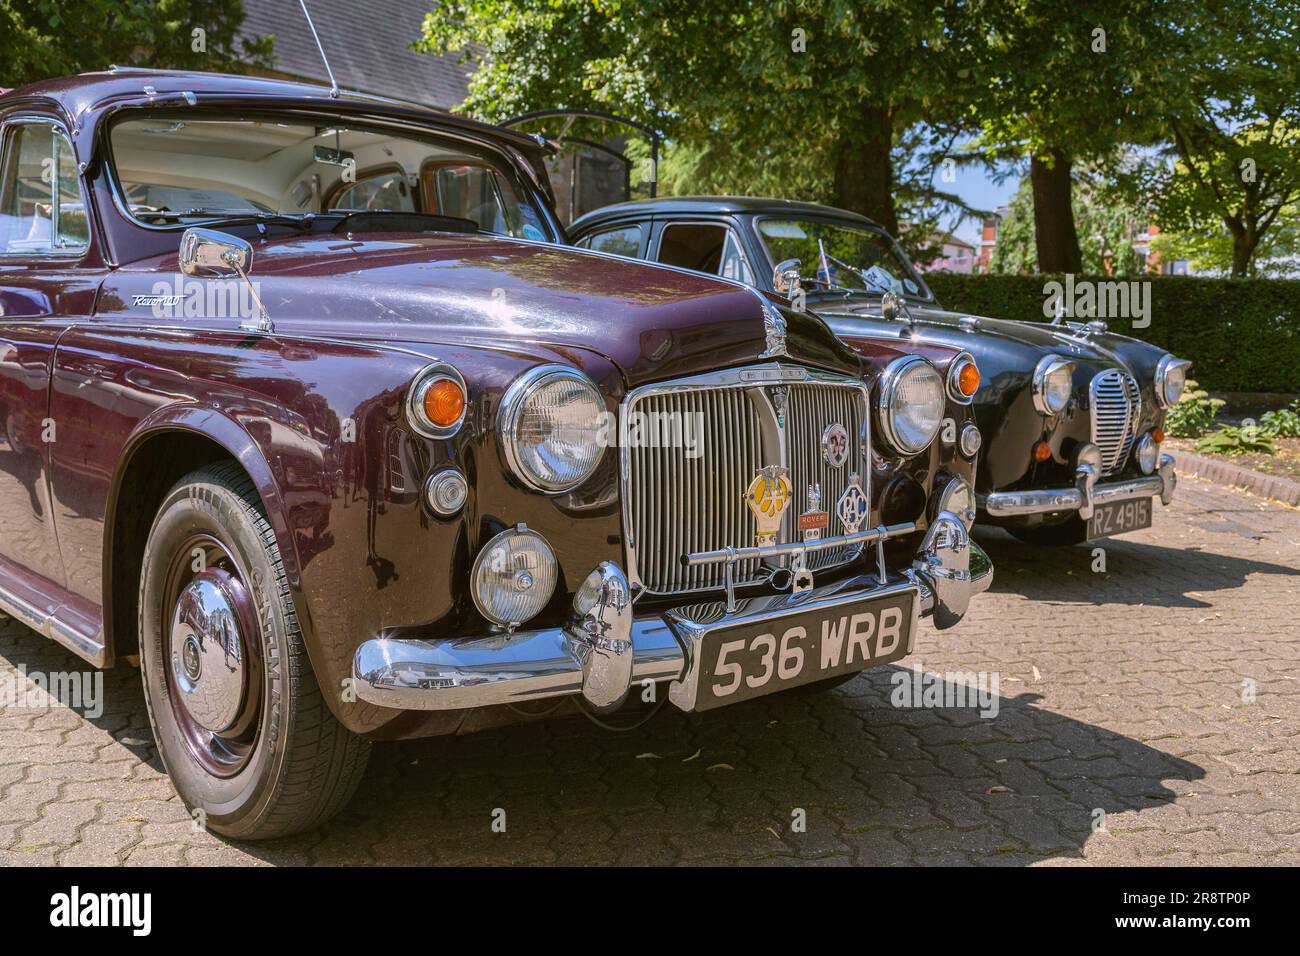 A 1960s Rover P4 luxury saloon parked next to a 1950s Austin A30 family car at a vintage and classic car show. Classic British cars. Stock Photo